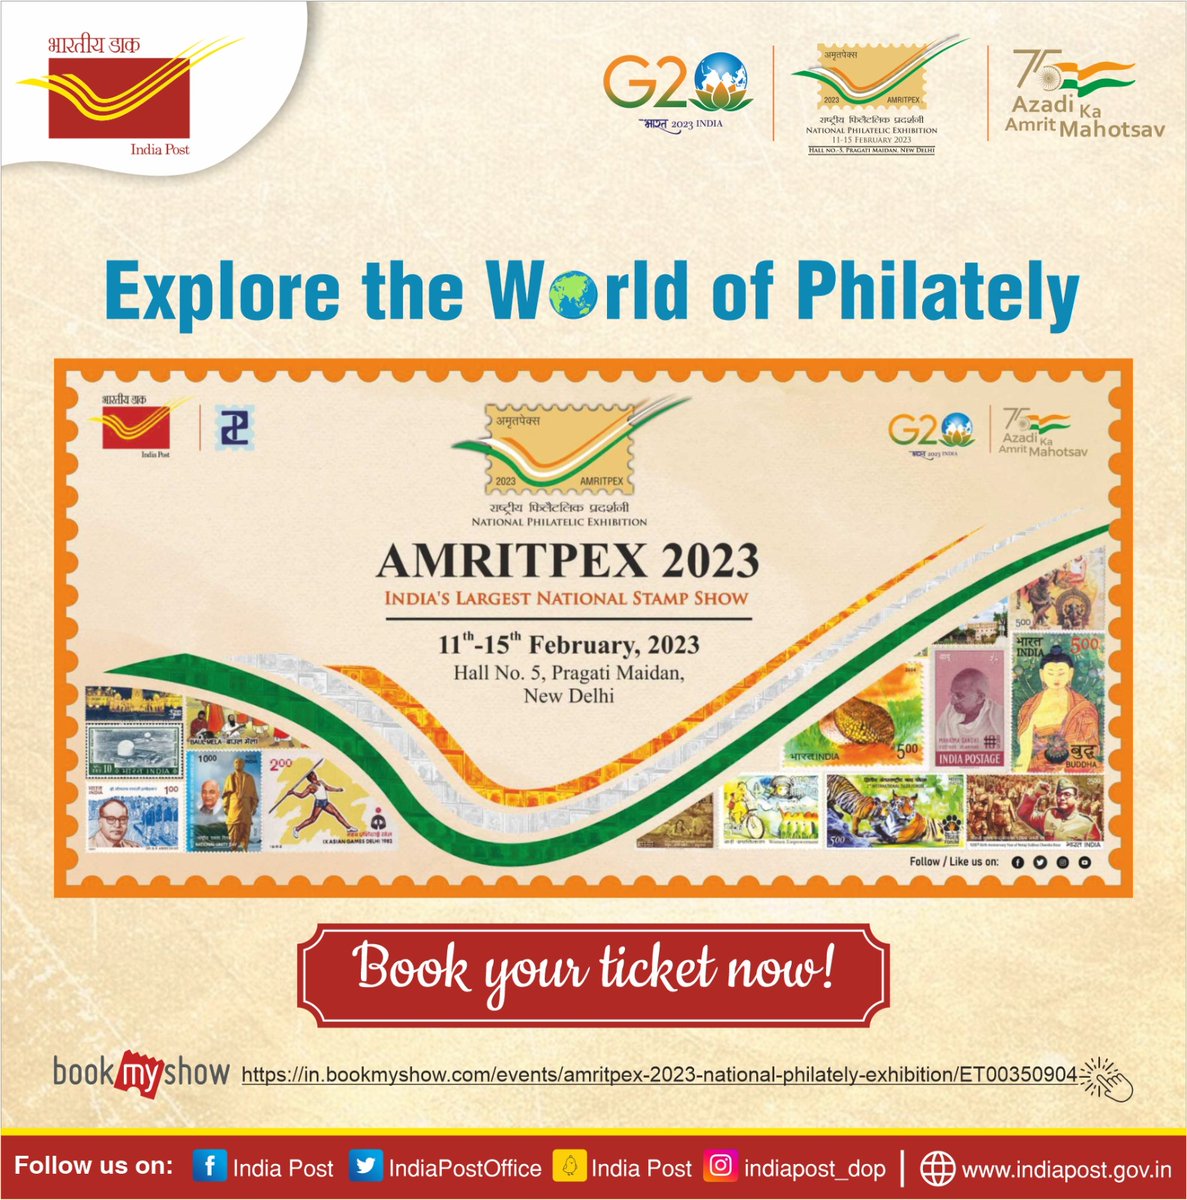 The National Philatelic Exhibition #AMRITPEX2023 is being organized from February 11-15, 2023 at Pragati Maidan, Delhi. Entry is free for stamp lovers. What are you waiting for? More than 3000 people have already booked their free tickets on bookmyshow.com